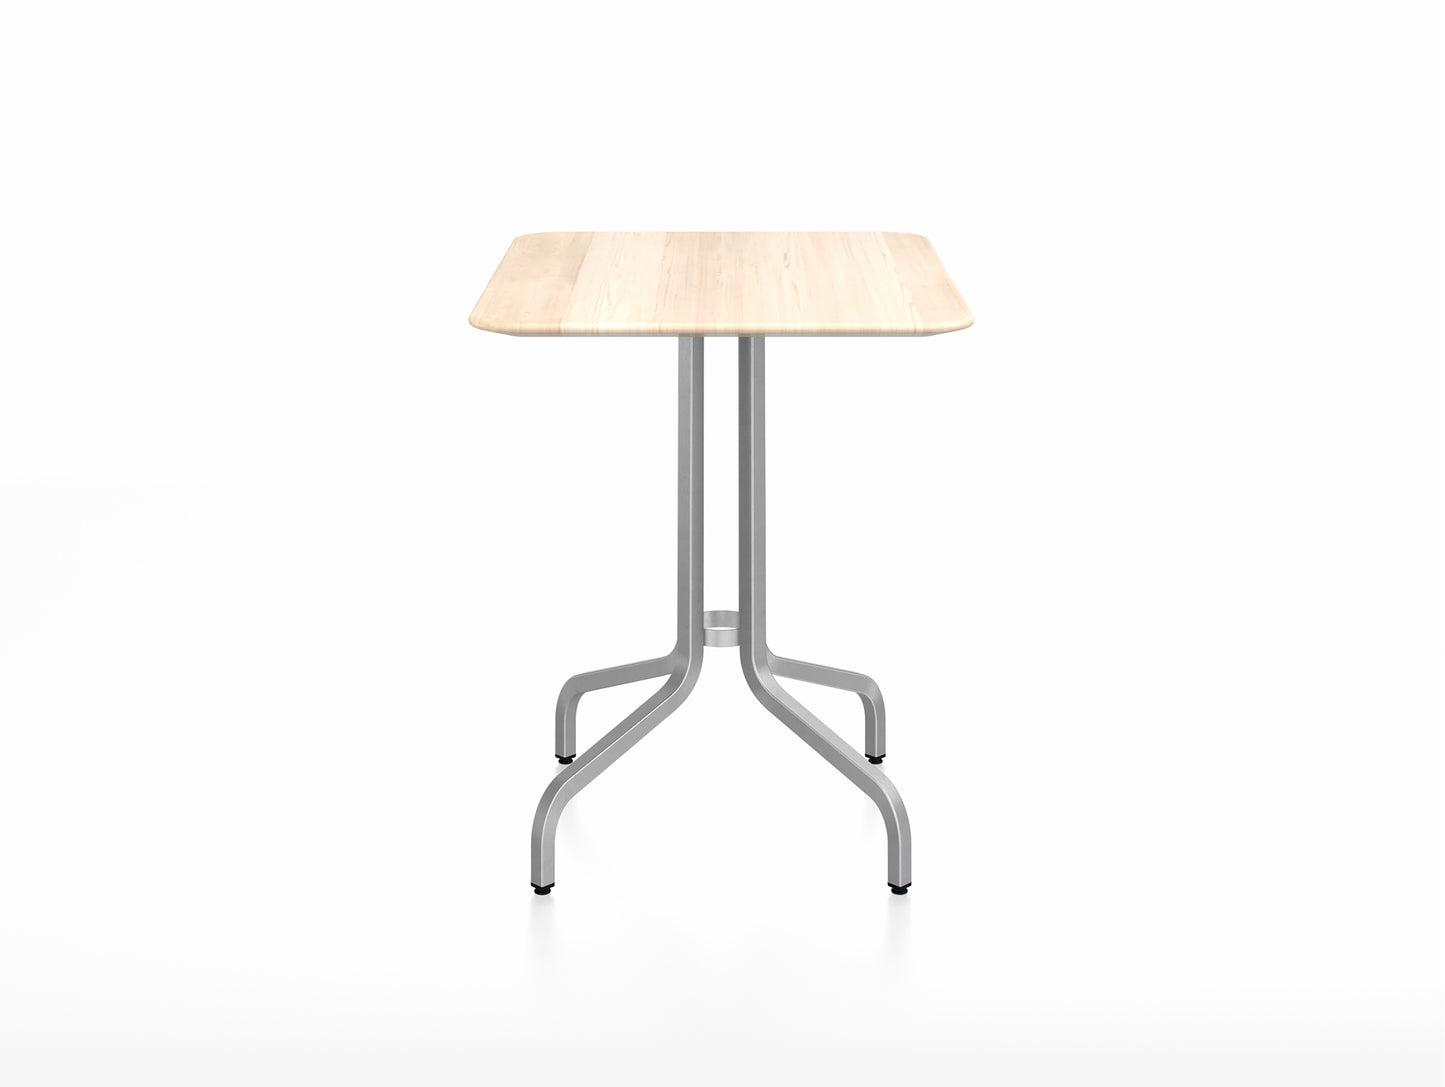 1 Inch Outdoor Cafe Table by Emeco - Rectangular (60 x 76 cm) / Hand Brushed Aluminium Base / Accoya Wood Tabletop